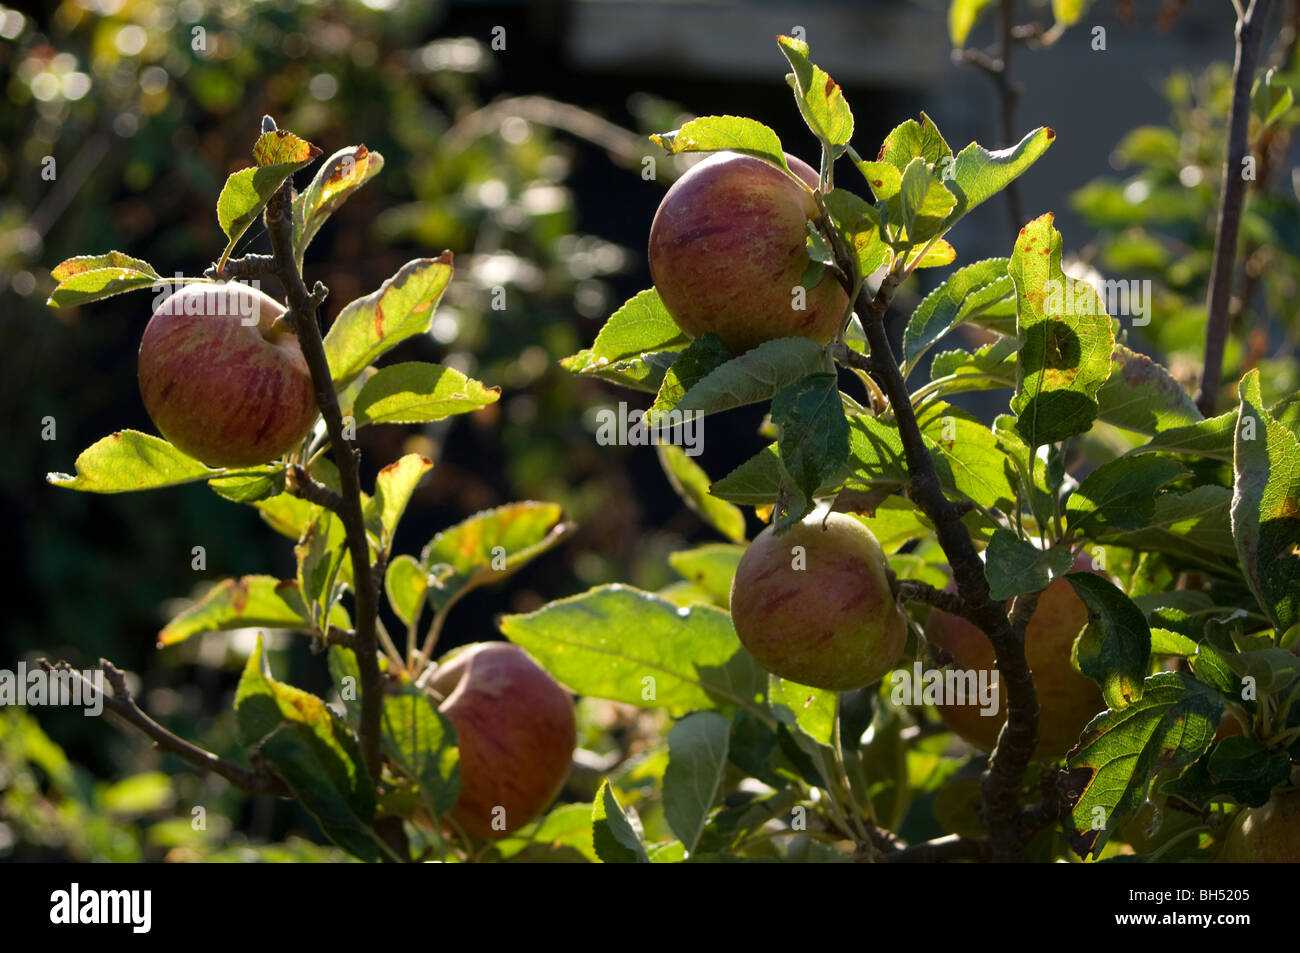 Apples (Malus domestica) growing on a tree on an allotment plot Stock Photo